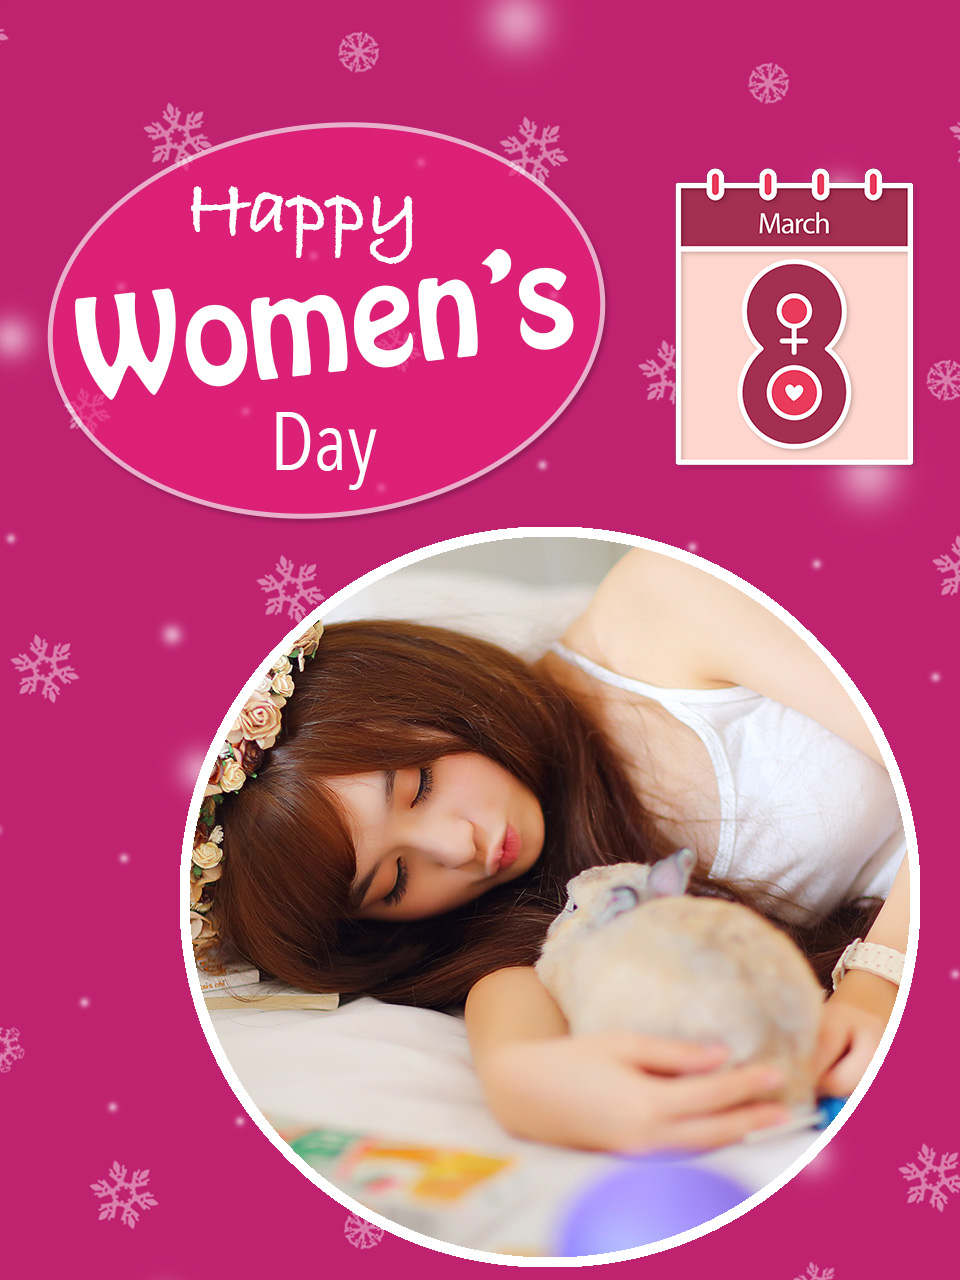 Happy woman's day 